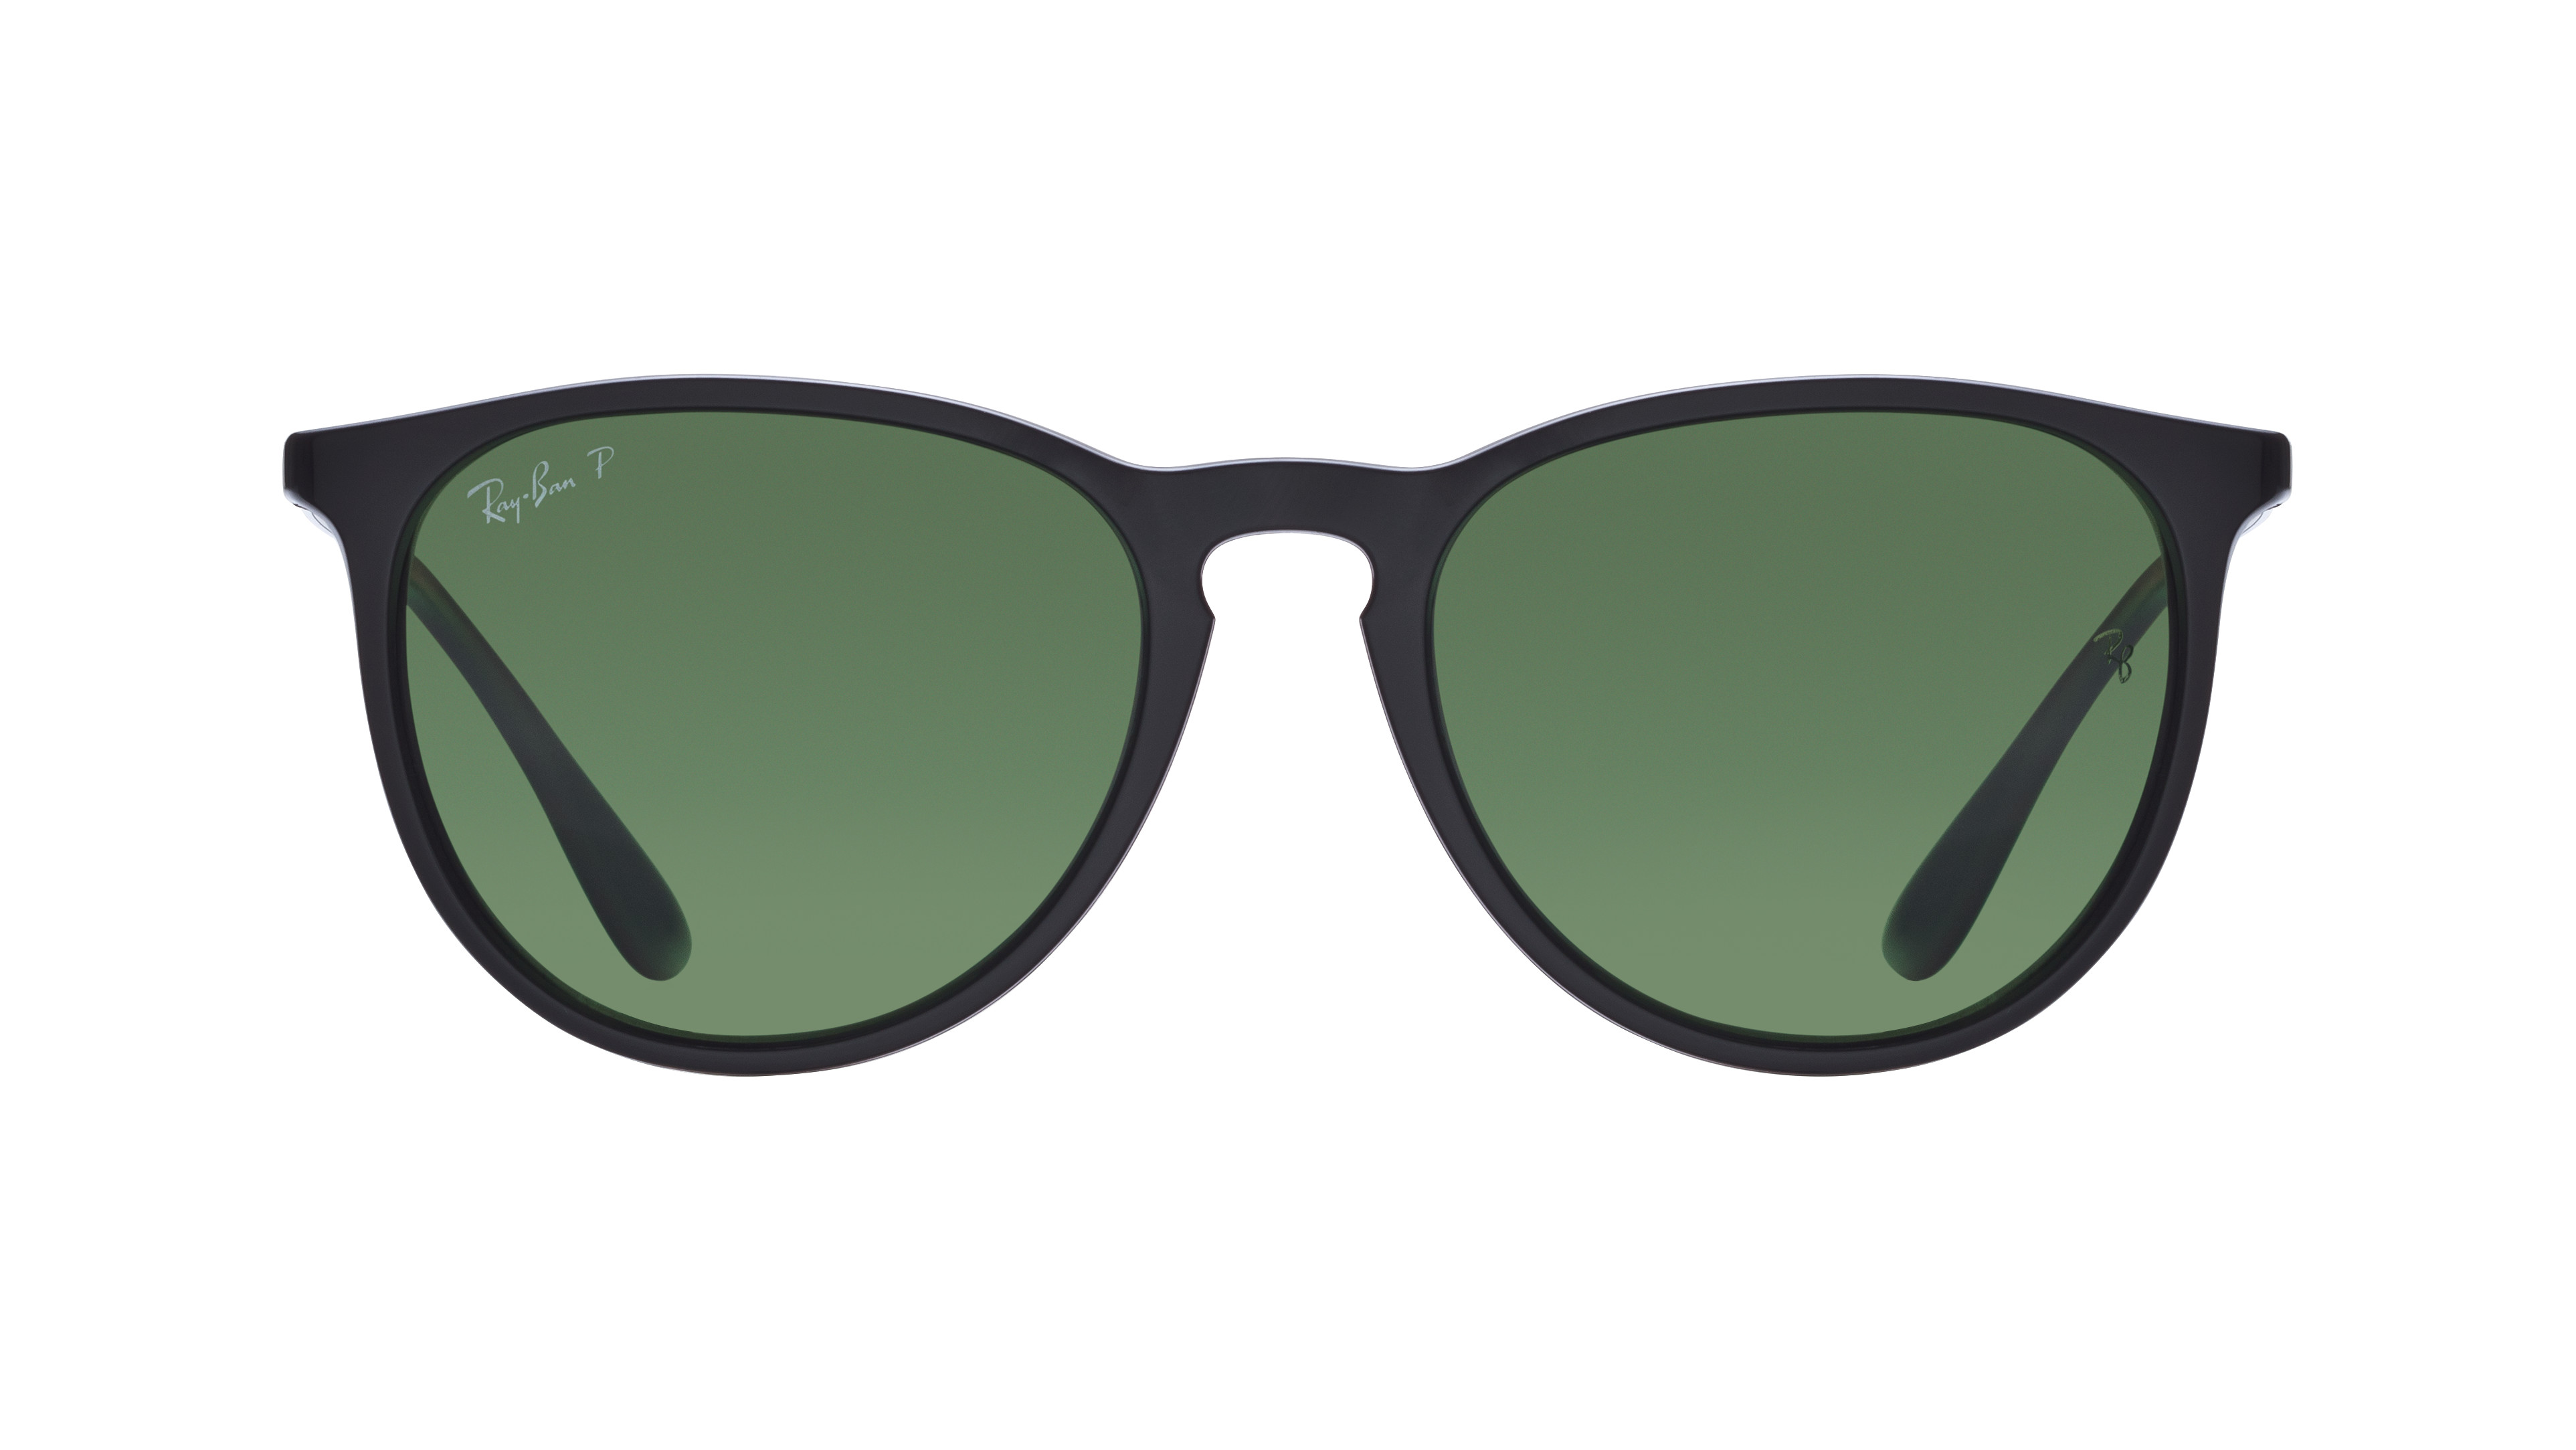 [products.image.front] Ray-Ban ERIKA 0RB4171 601/2P Sonnenbrille